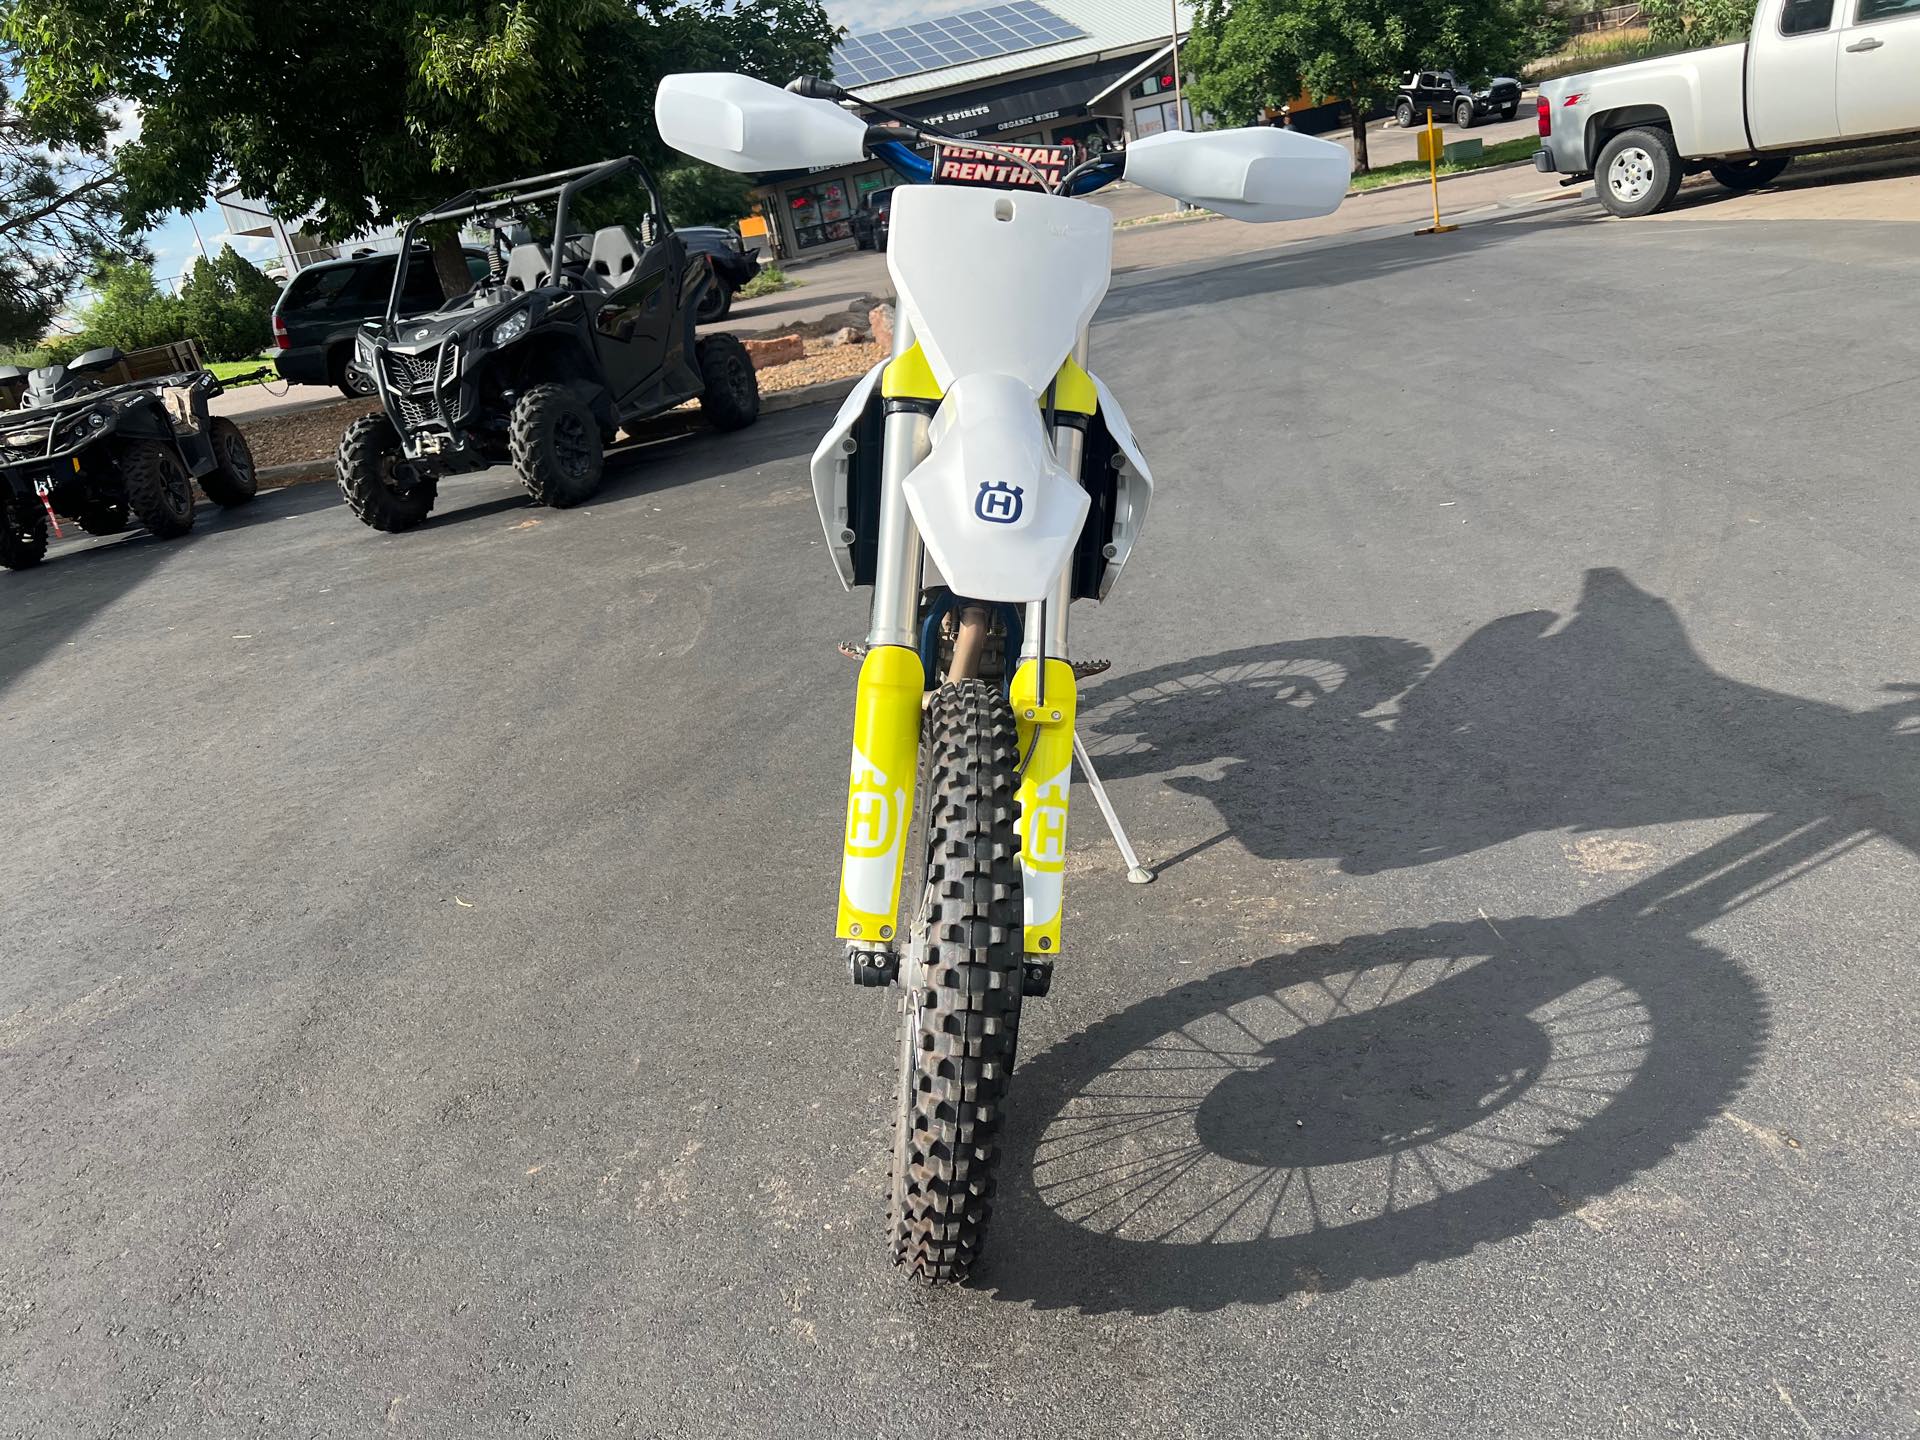 2019 Husqvarna FX 450 at Aces Motorcycles - Fort Collins